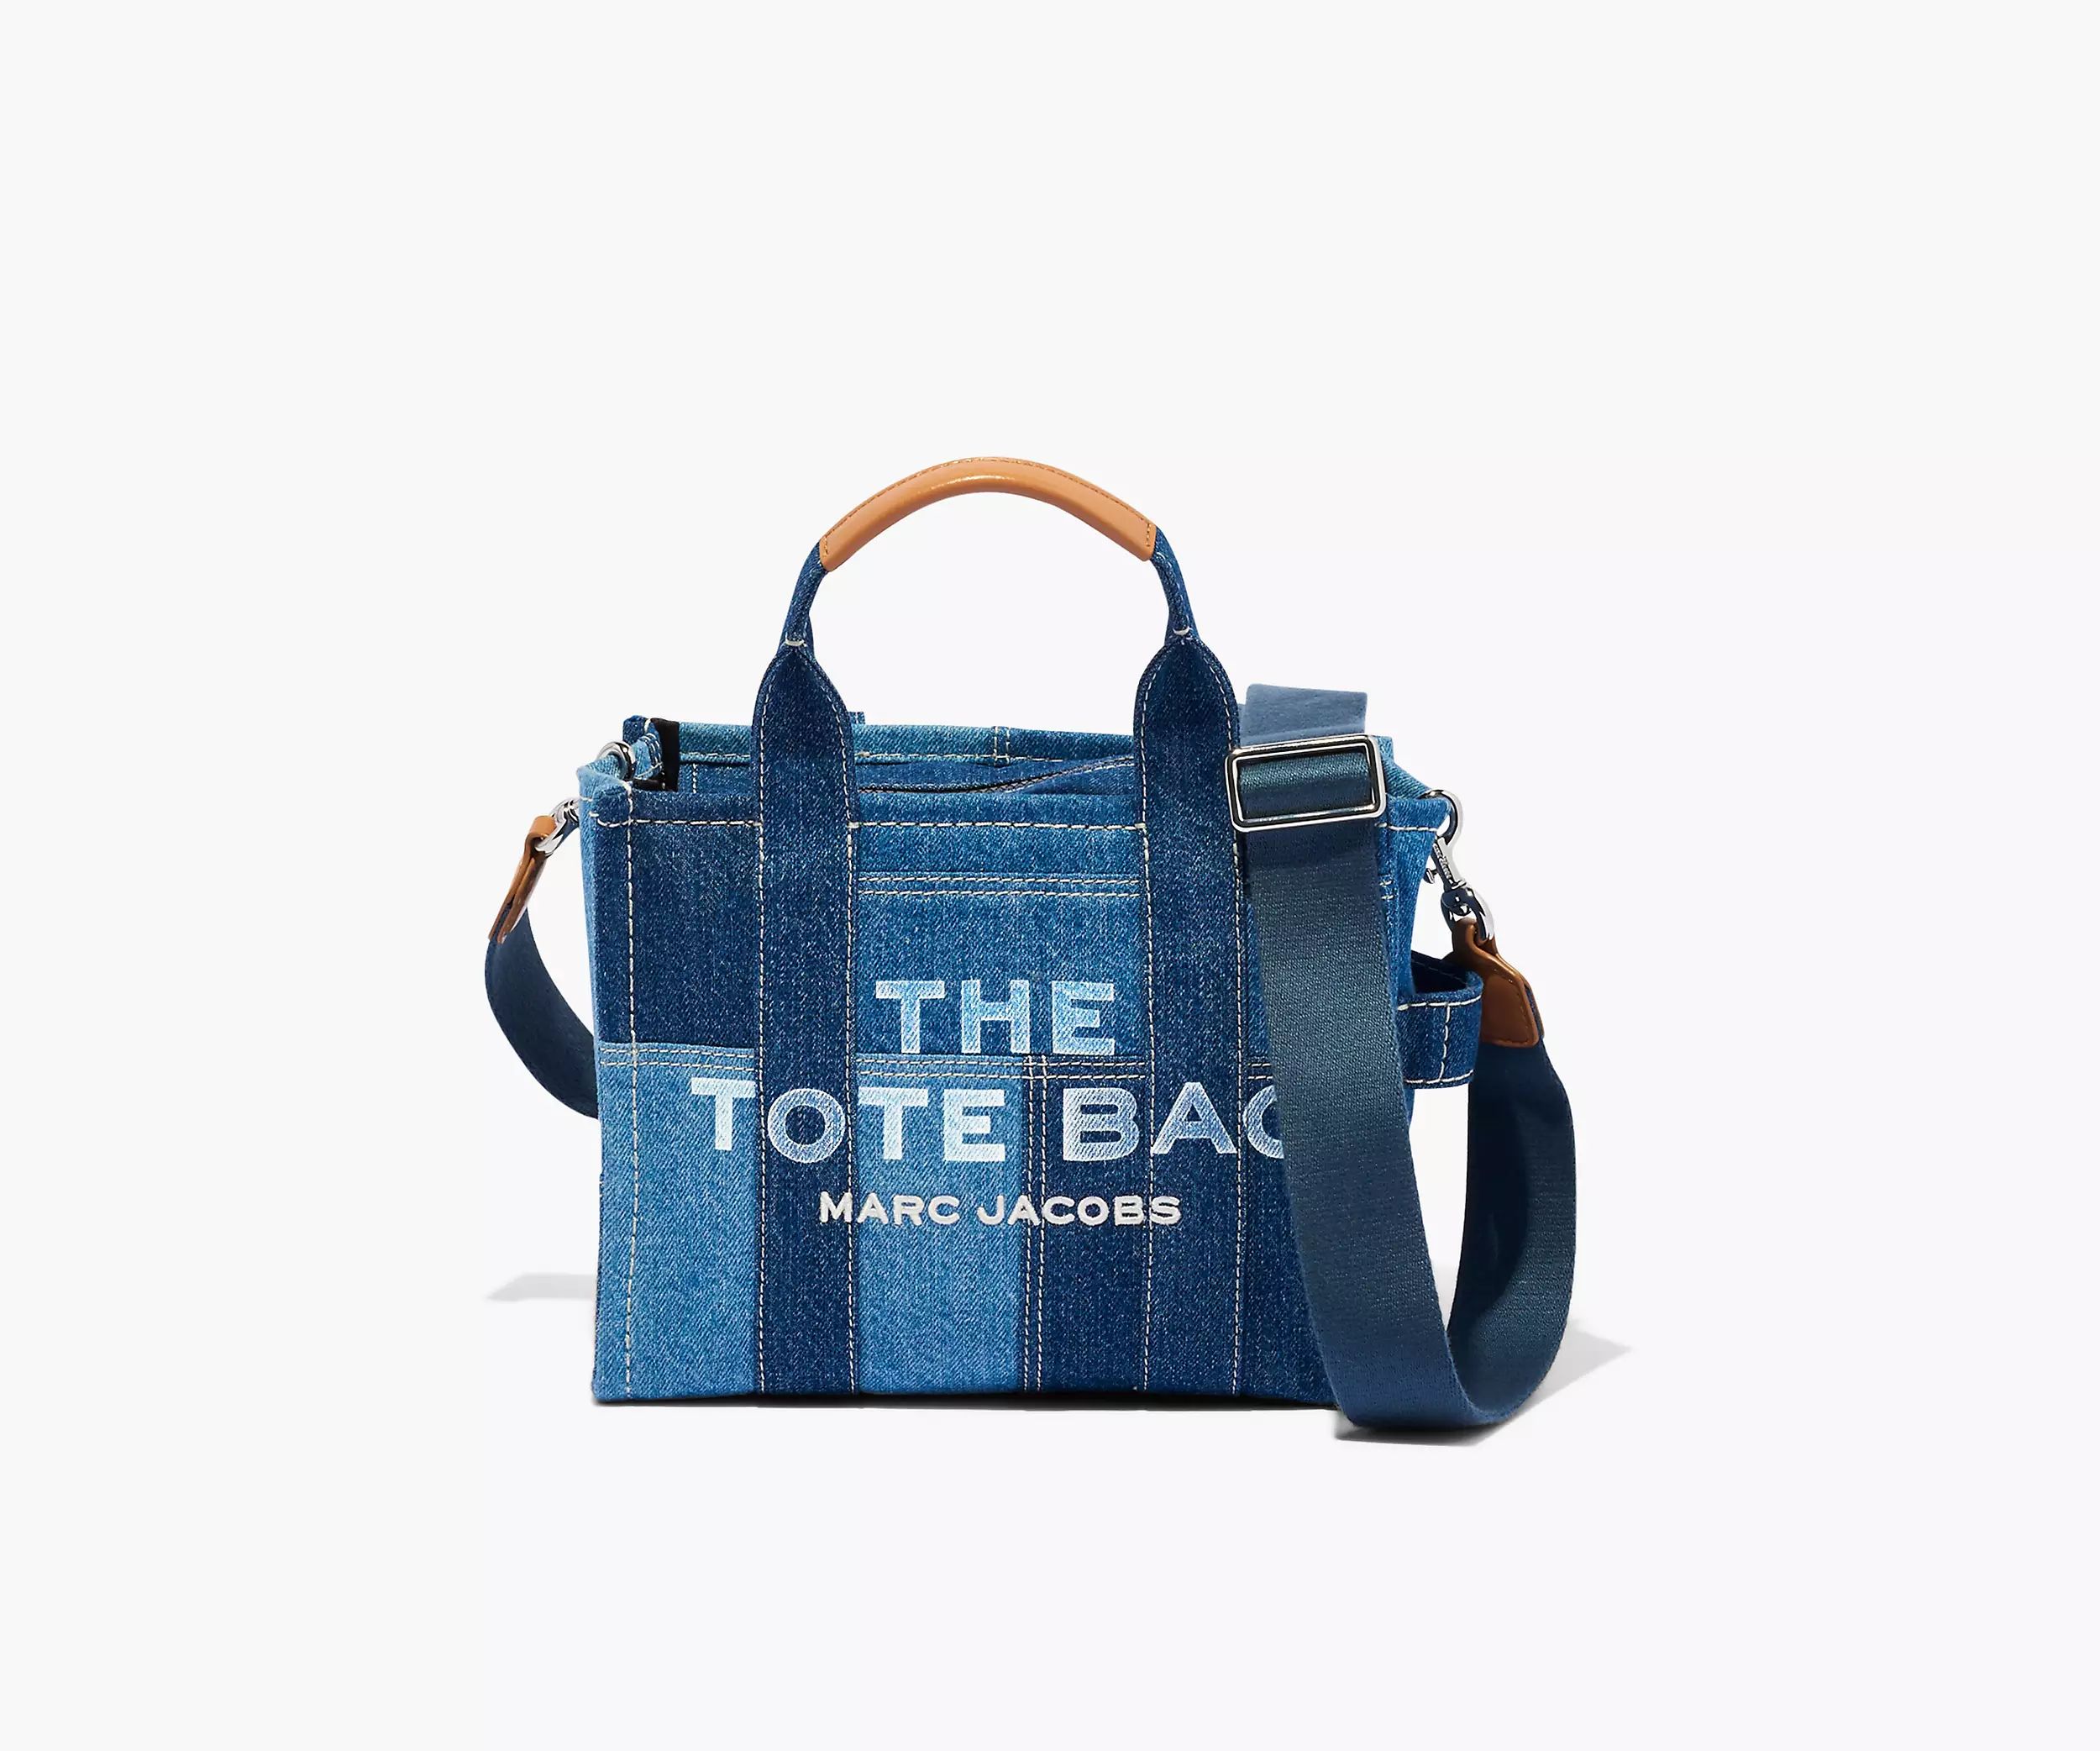 The Denim Small Tote Bag | Marc Jacobs